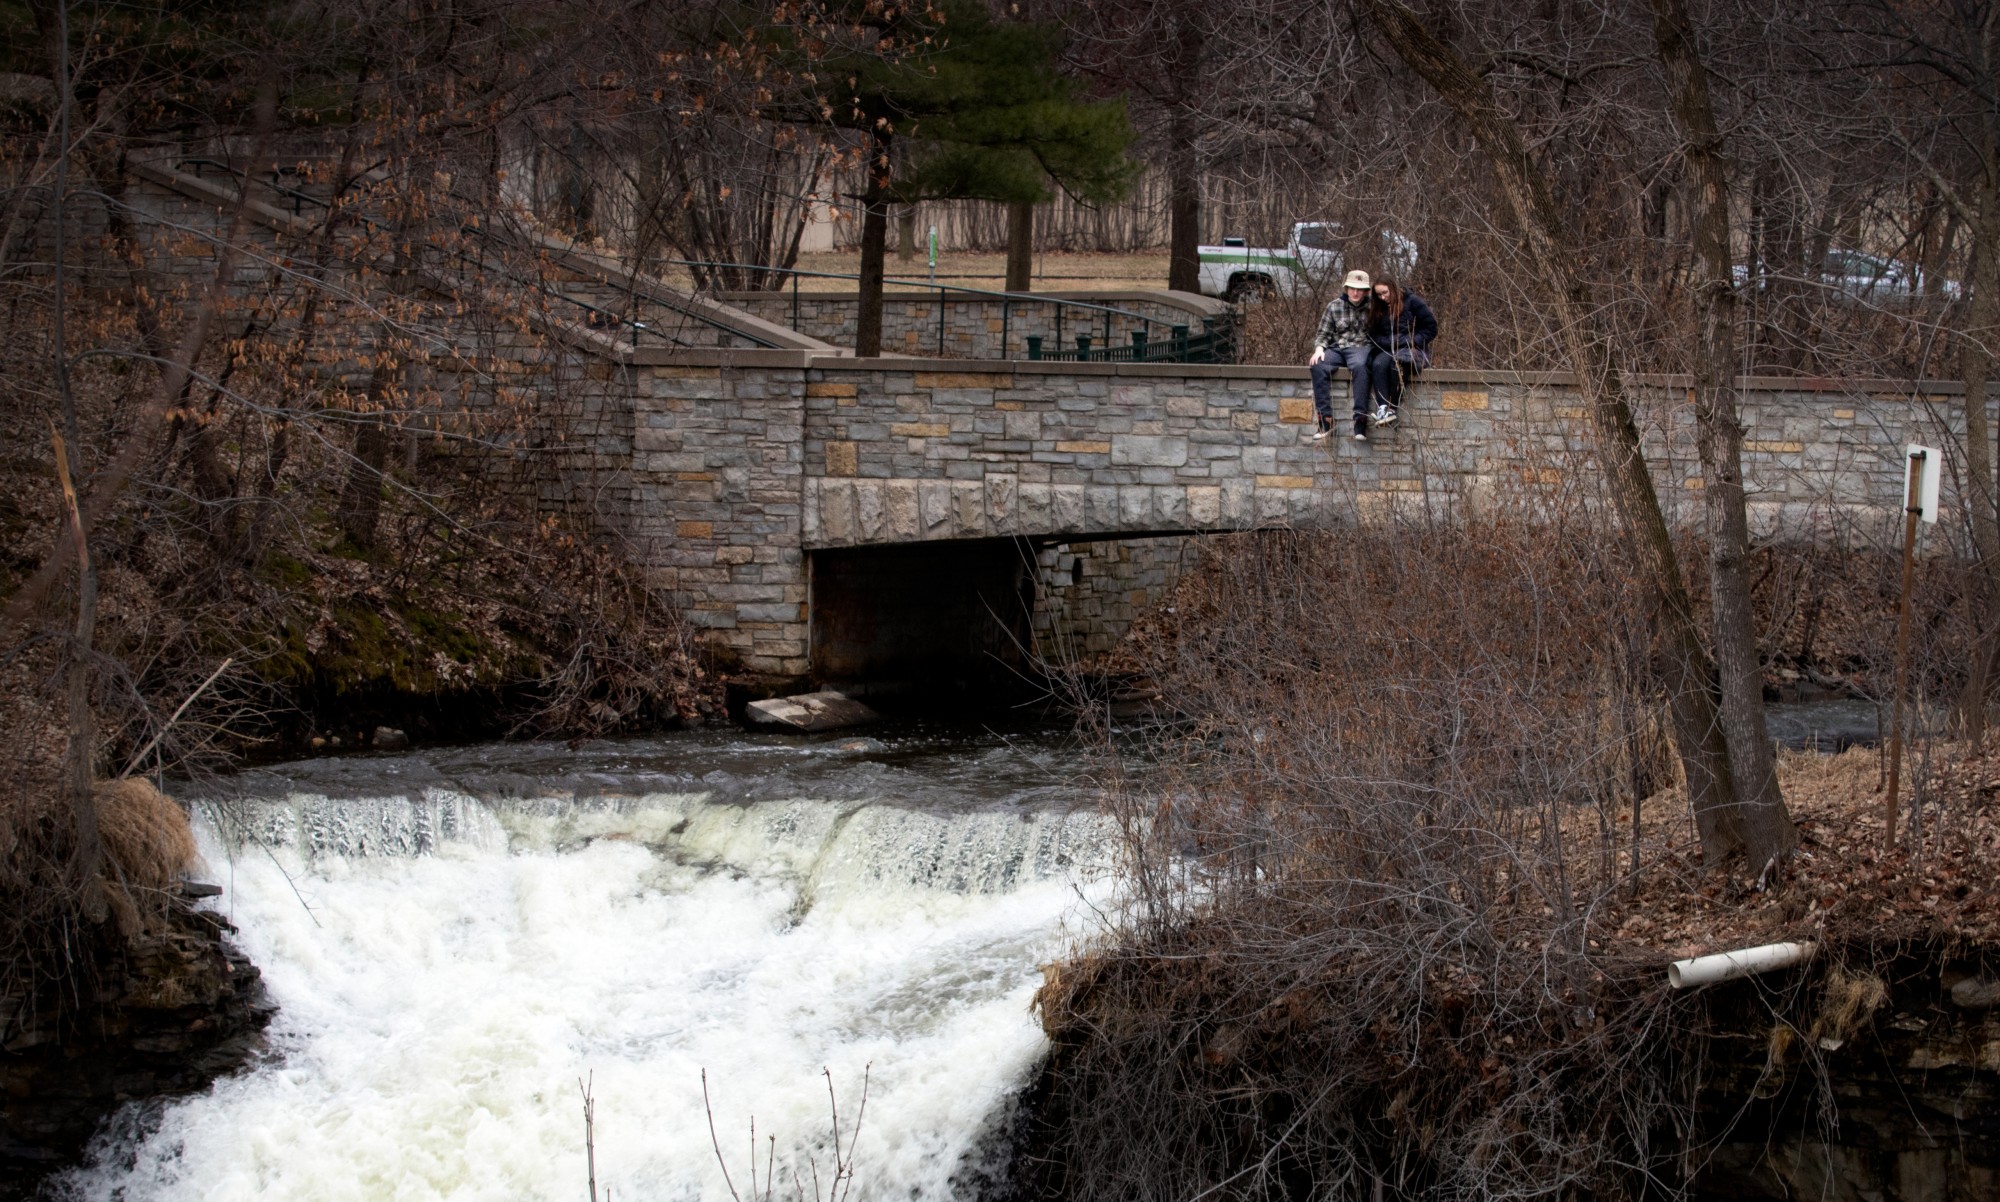 Brode Benish, a first year student at the University of St. Thomas and Sophia Rossman, a first year student at St. Catherine University, sit on Bridge 1 over Minnehaha Falls in Minnehaha Regional Park in Minneapolis on Wednesday, March 25. 